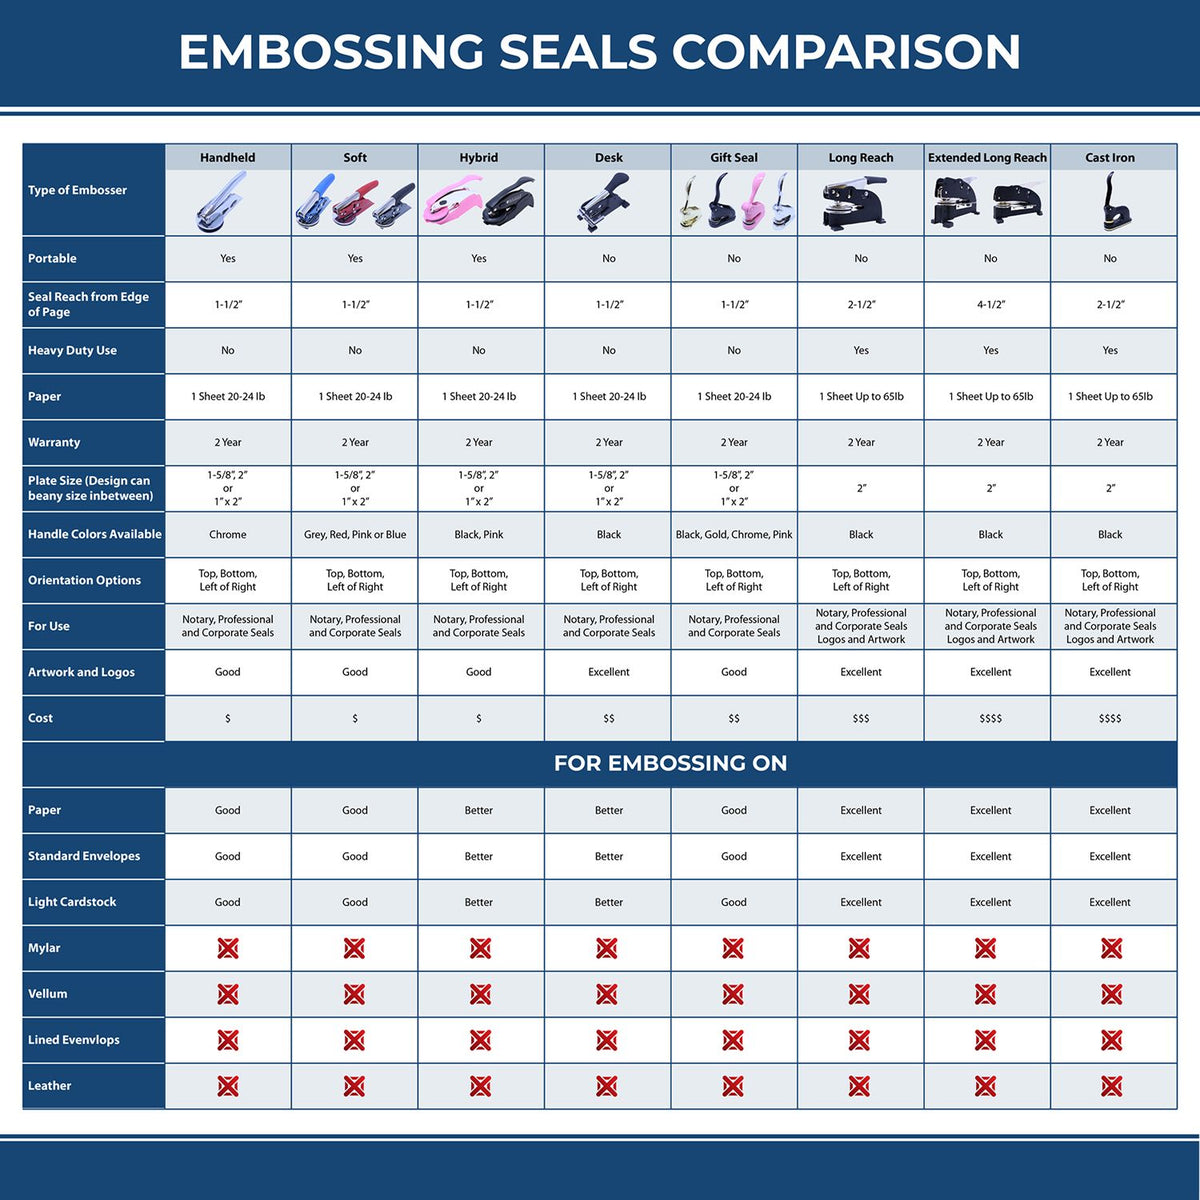 A comparison chart for the different types of mount models available for the Heavy Duty Cast Iron Vermont Engineer Seal Embosser.